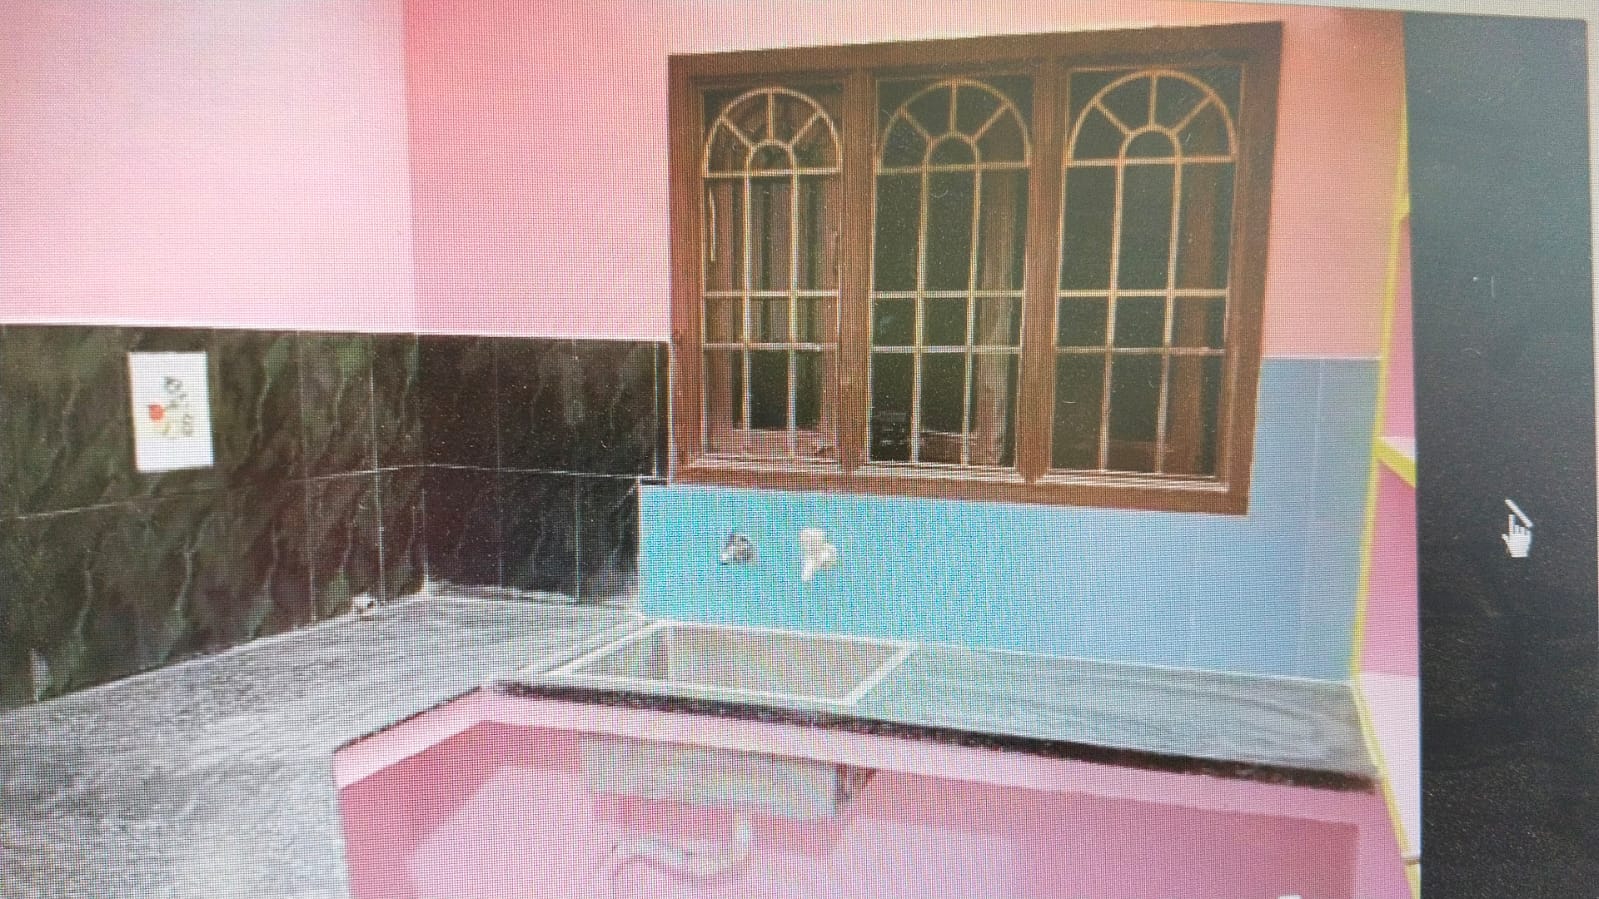 12079-for-rent-2BHK-Residential-House-Semi-Furnished-Monthly-rs-8500-in-Pondicherry-City-Pondicherry-Puducherry-Pondicherry